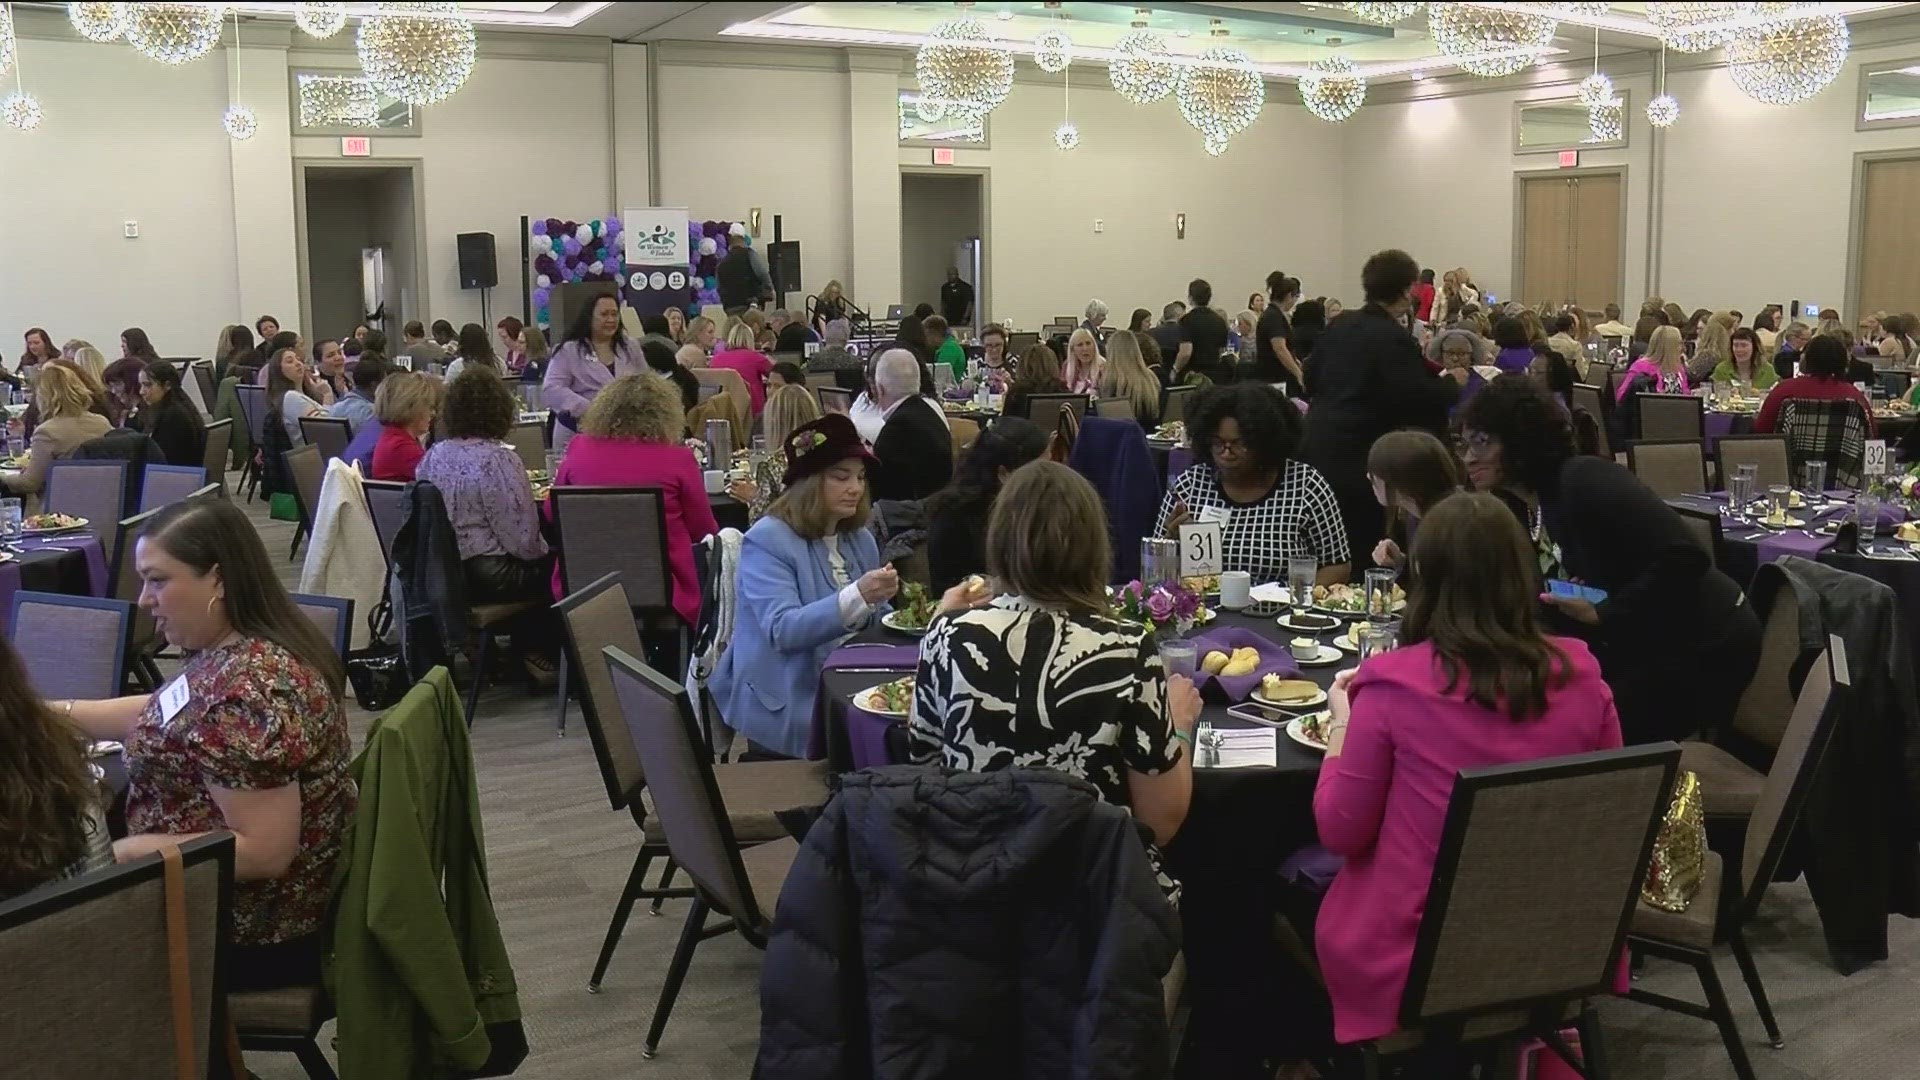 The 7th annual Northwest Ohio International Women's Day Luncheon happened in downtown Toledo on Friday.